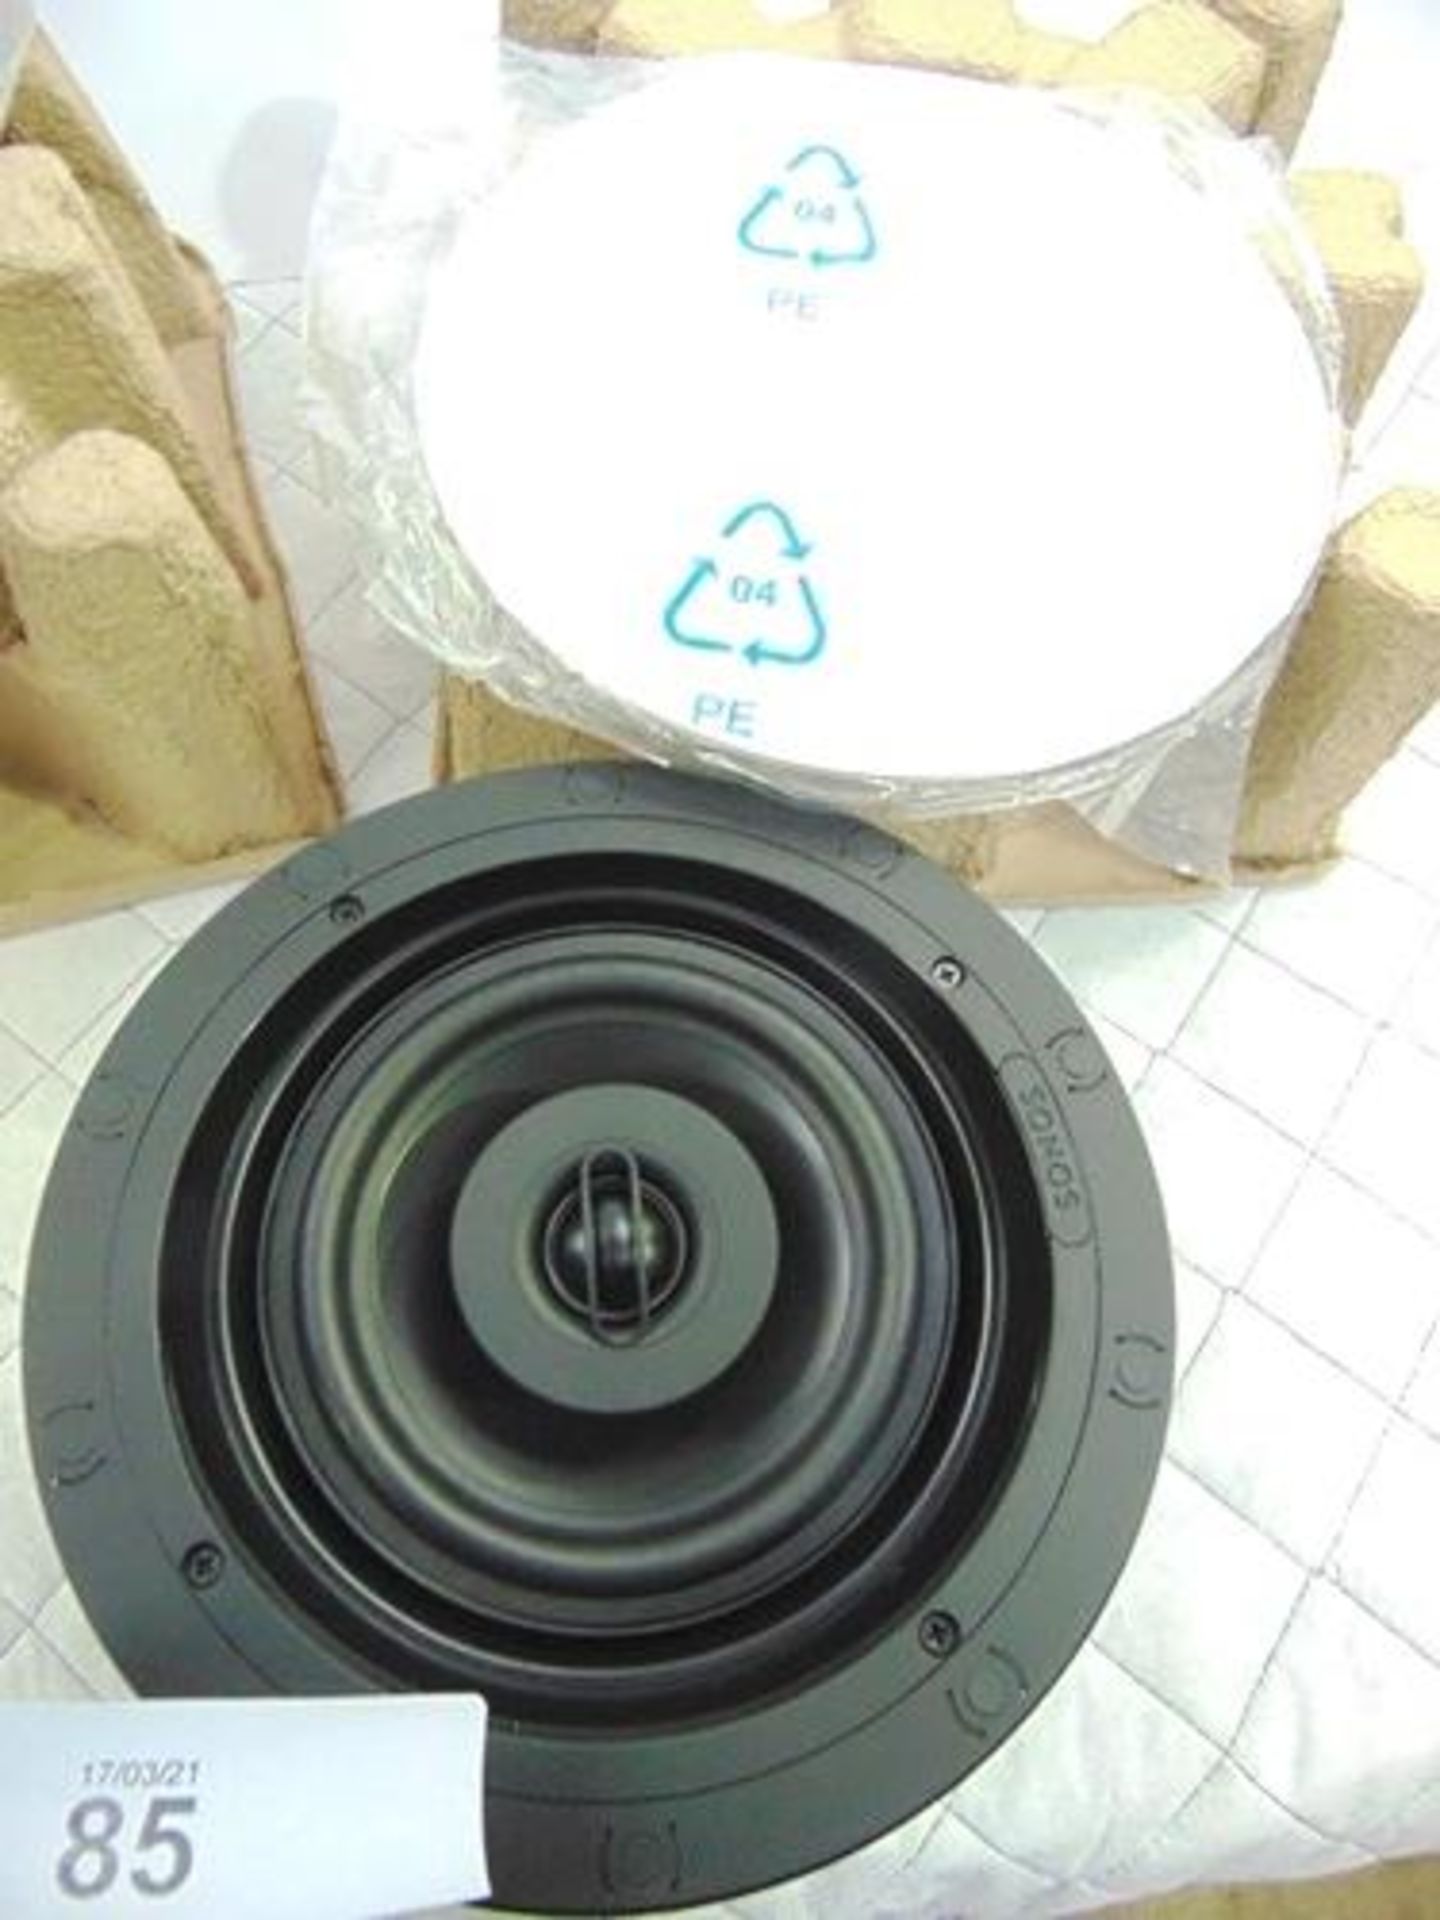 2 x Sonos ceiling mounted speakers, 100V, 120W, model INCLGWW12014SO47O - New (ES8) - Image 3 of 8